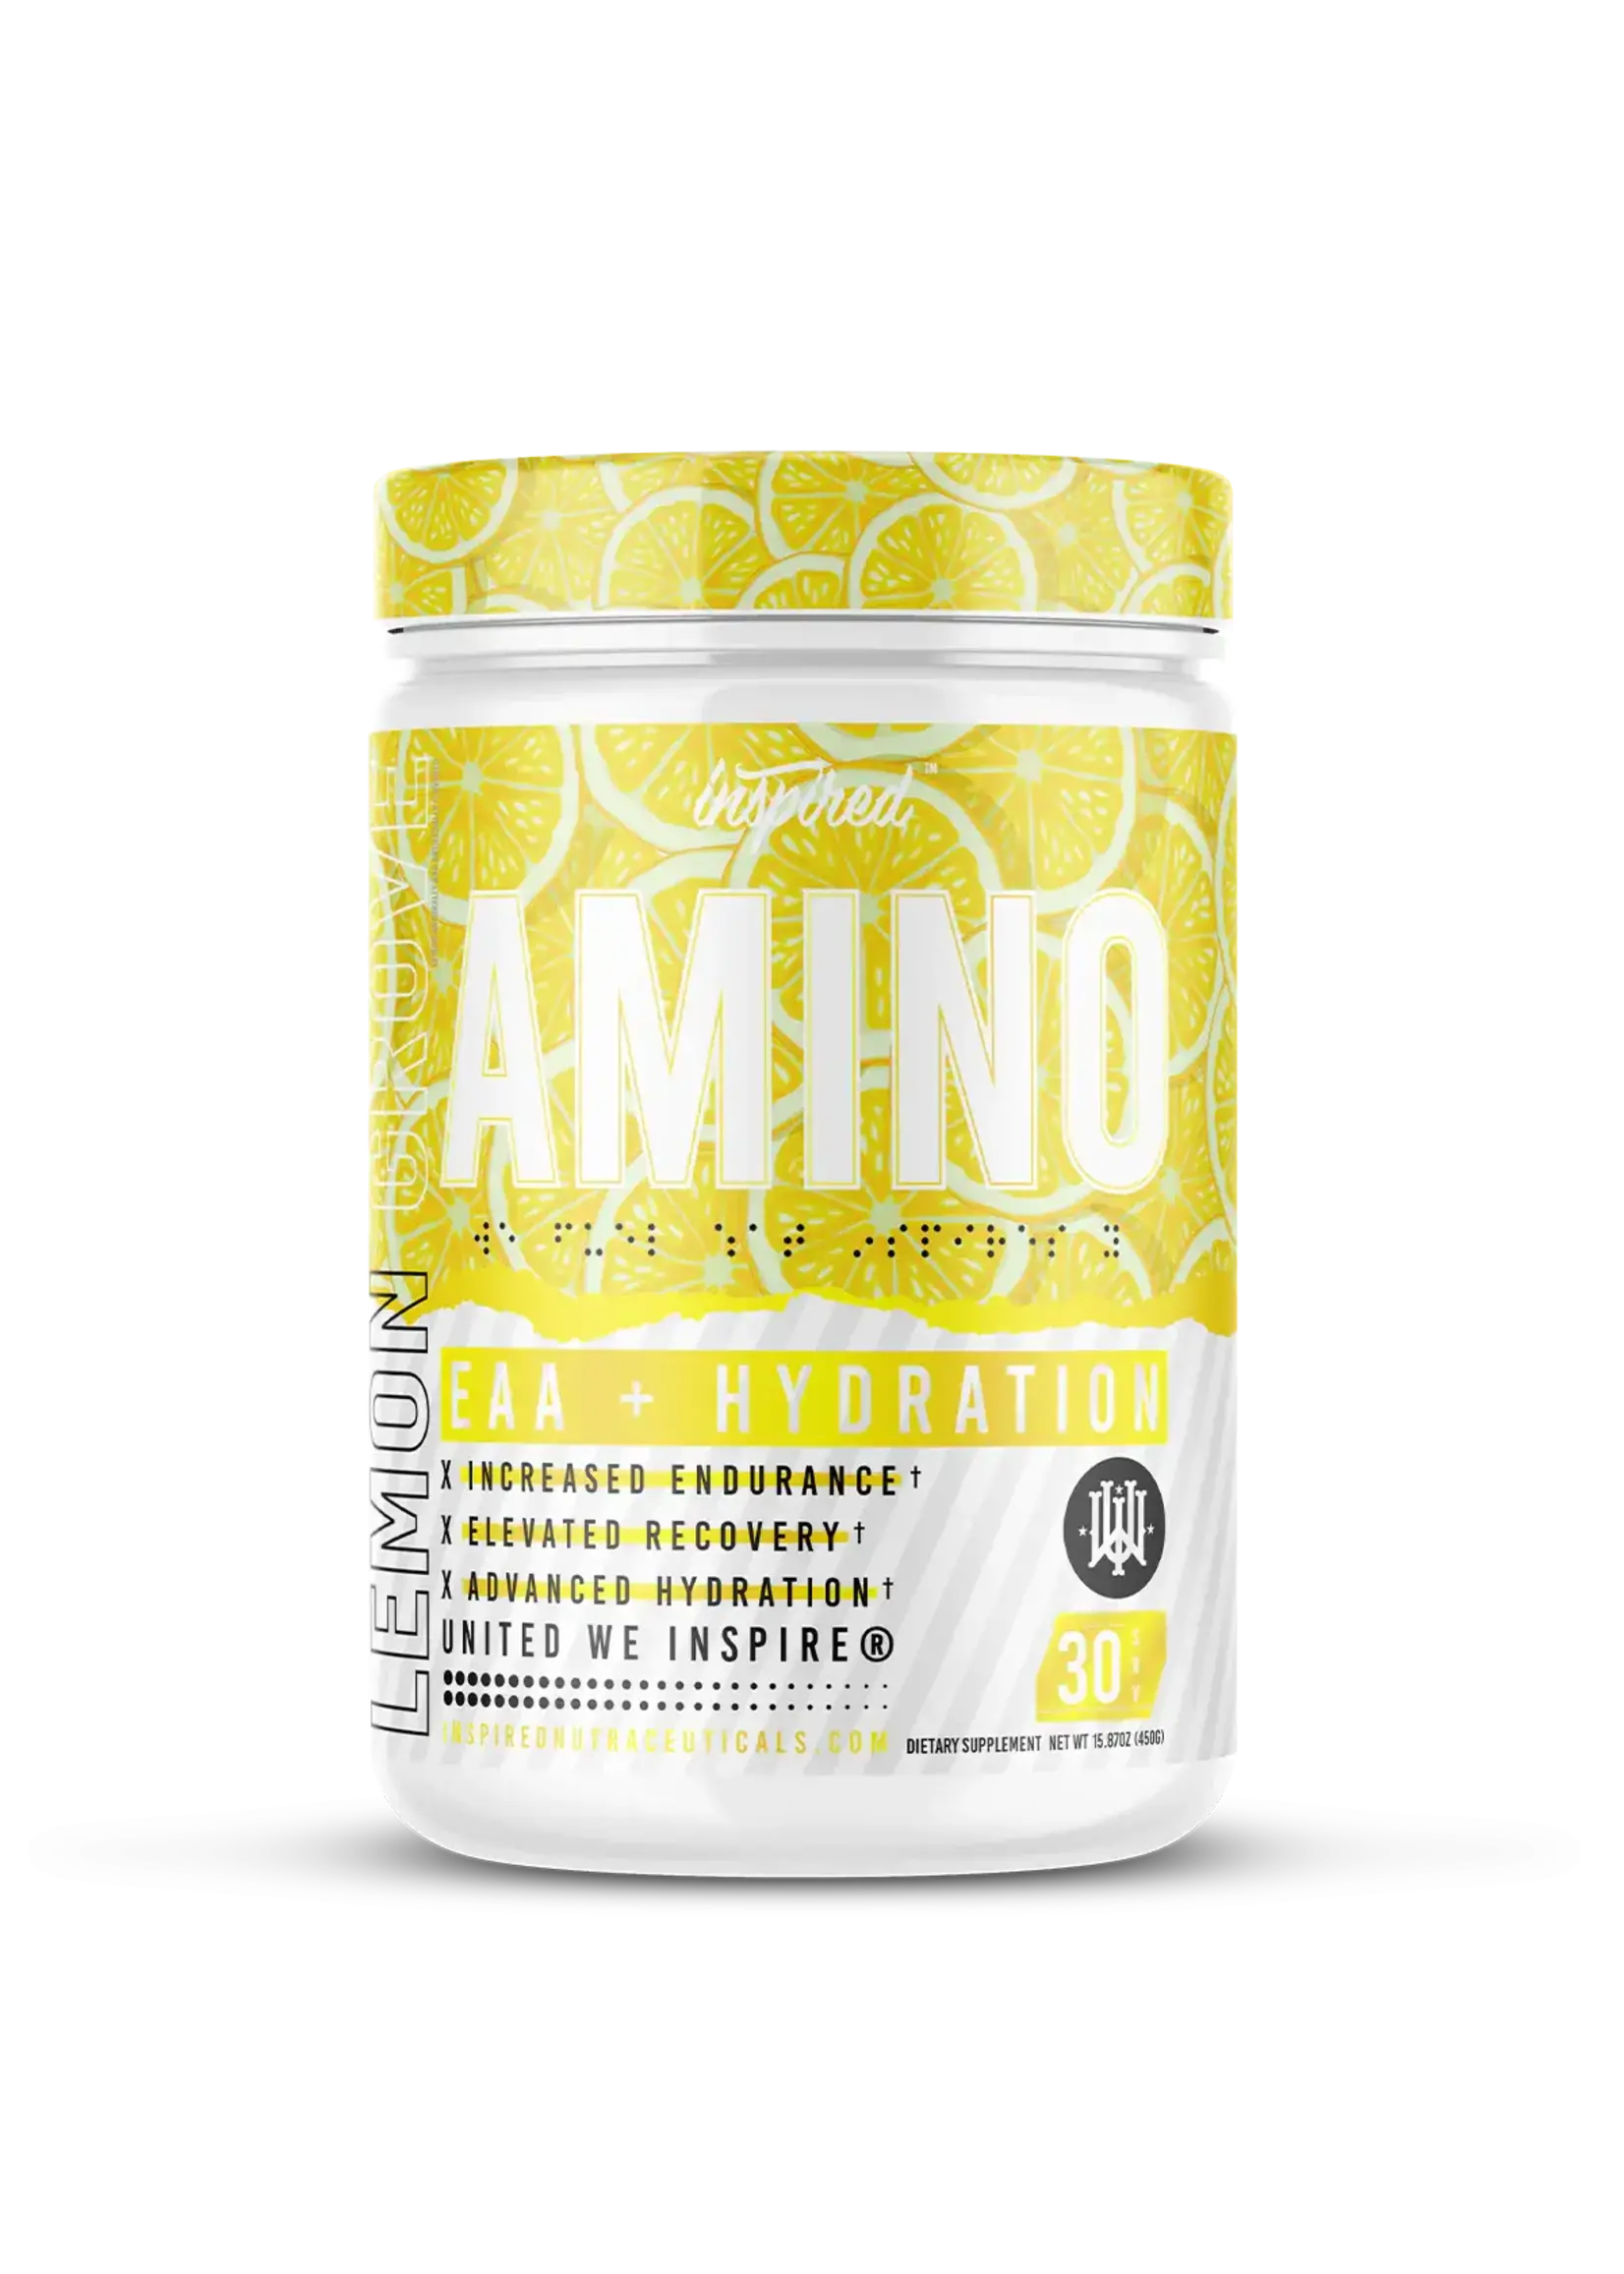 Inspired Nutraceuticals Inspired Amino